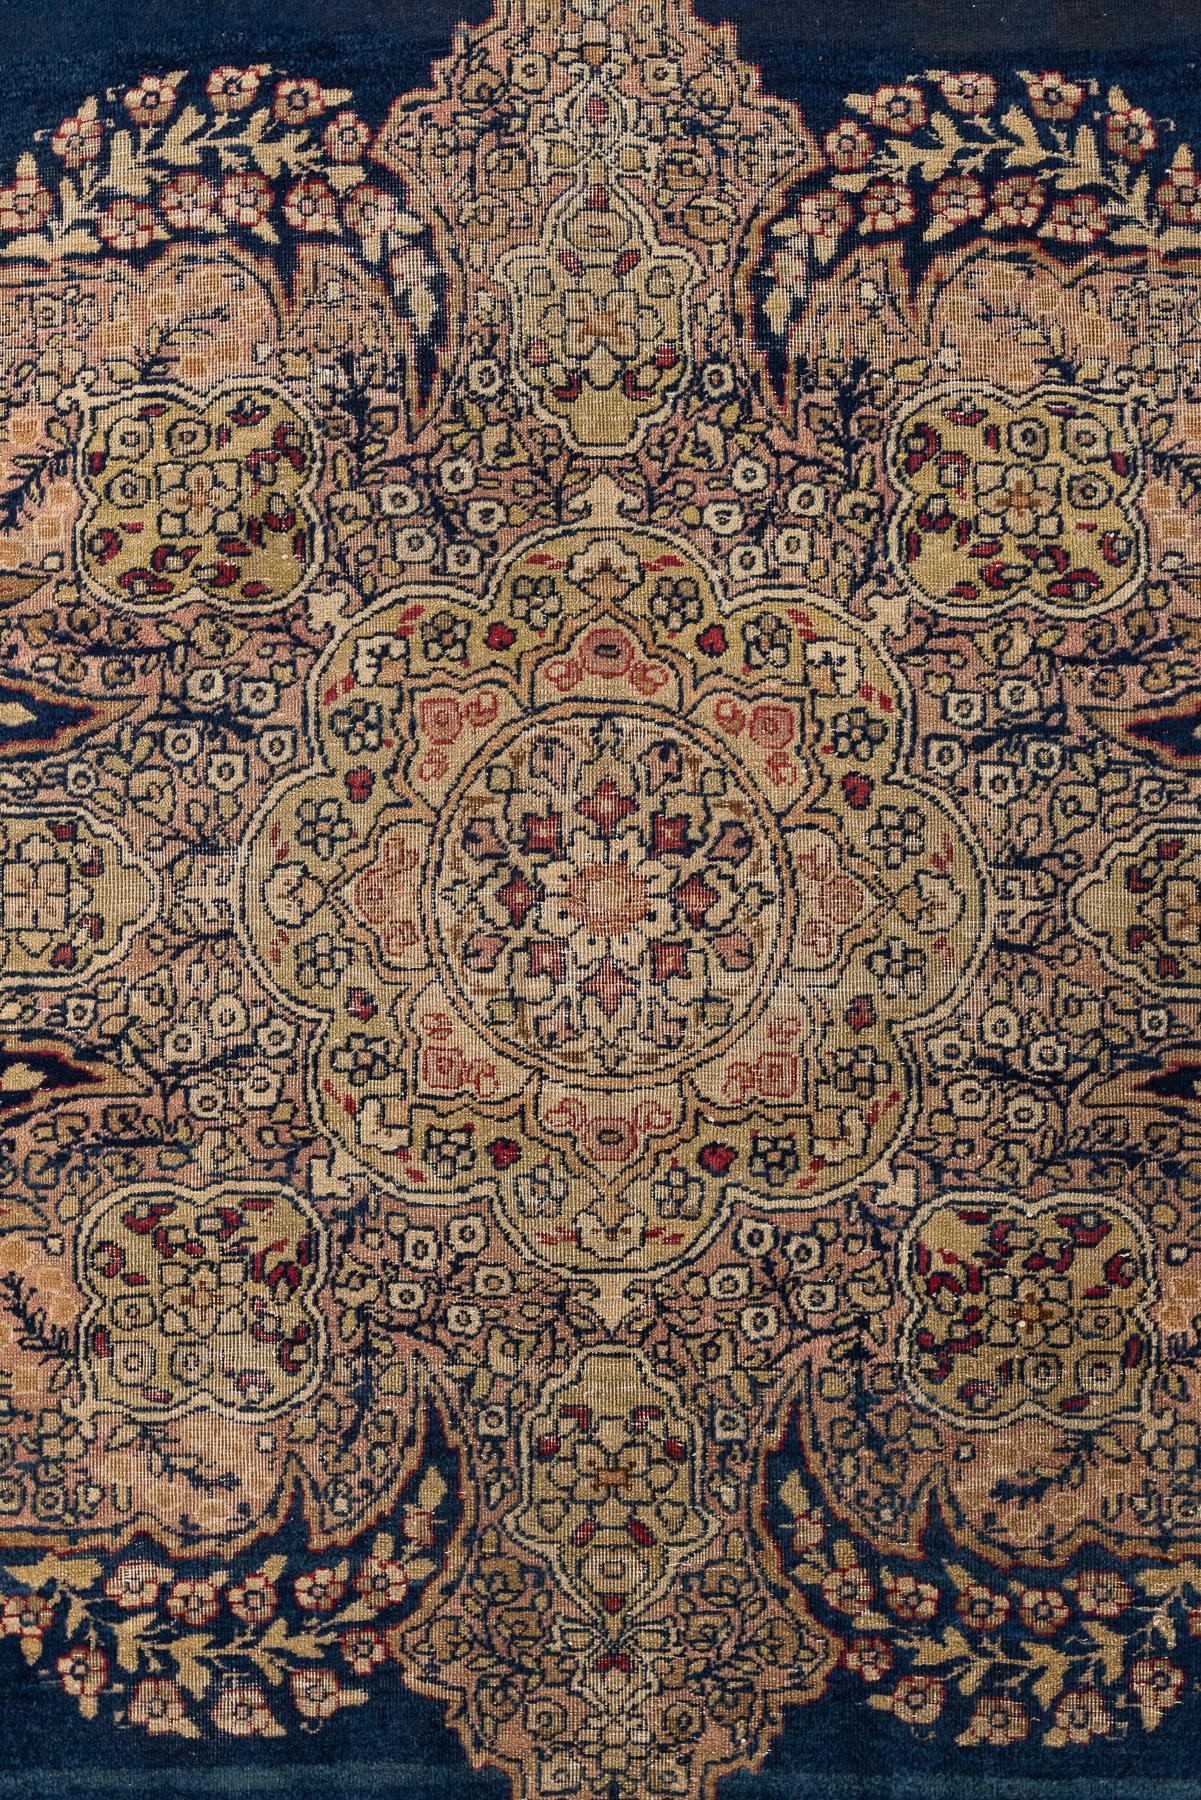 Kerman – South Persia

This luxurious medallion Kerman is made with flowers and vines in the centre of the navy-blue field of the rug. The highlight is the abrash technique used with different shades of blue, which provides depth and an admirable